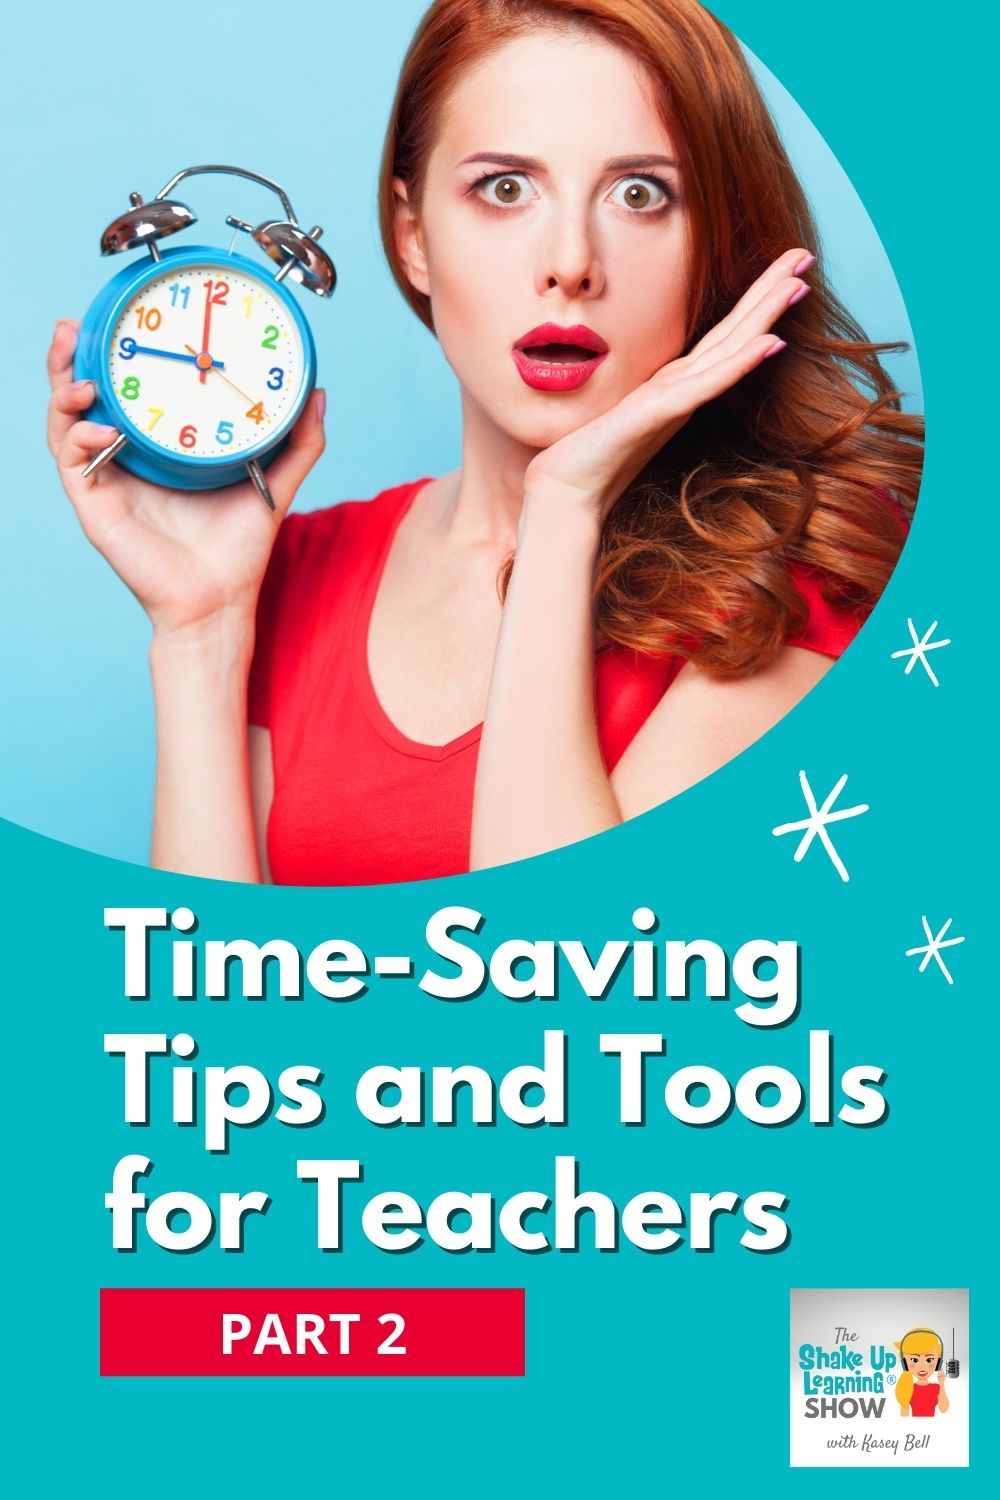 Time-Saving Tips and Tools for Teachers (Part 2) – SULS0136